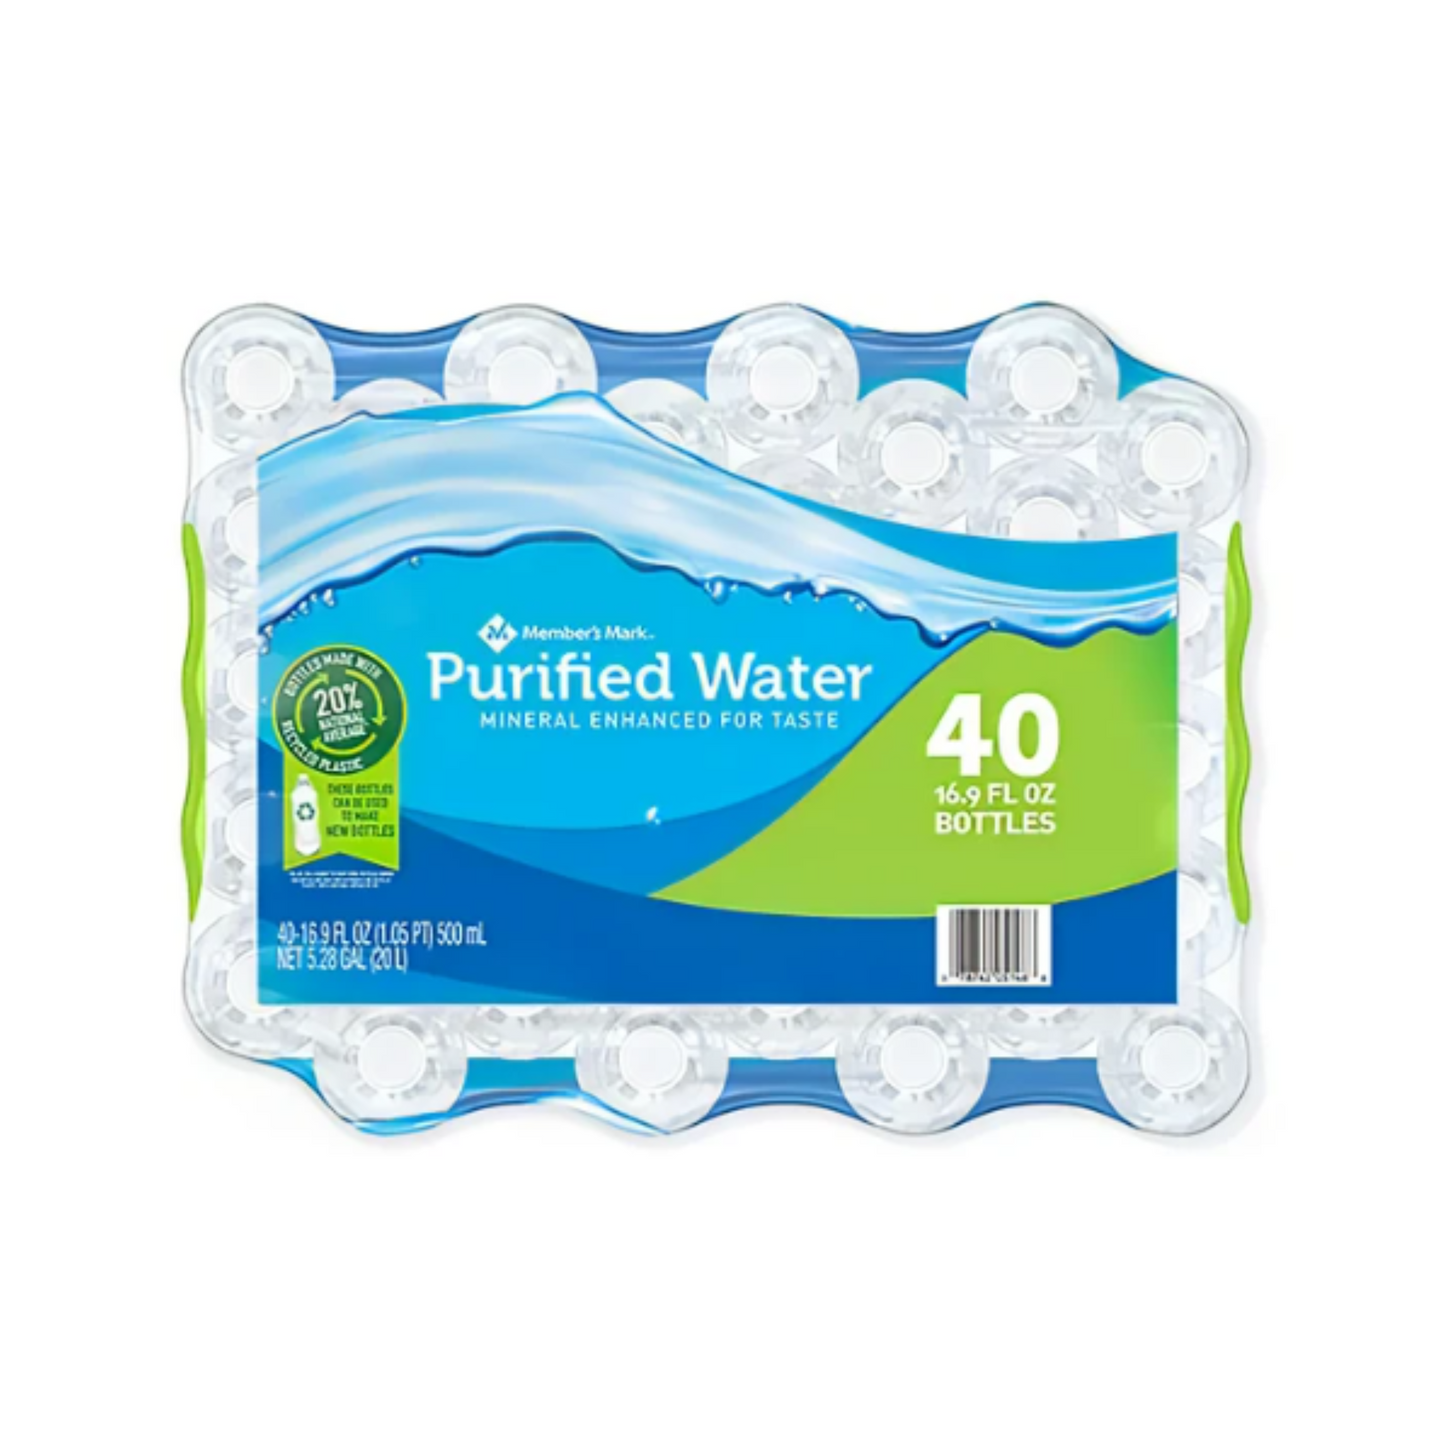 Get pure refreshment on-the-go with our 40-pack of purified water bottles